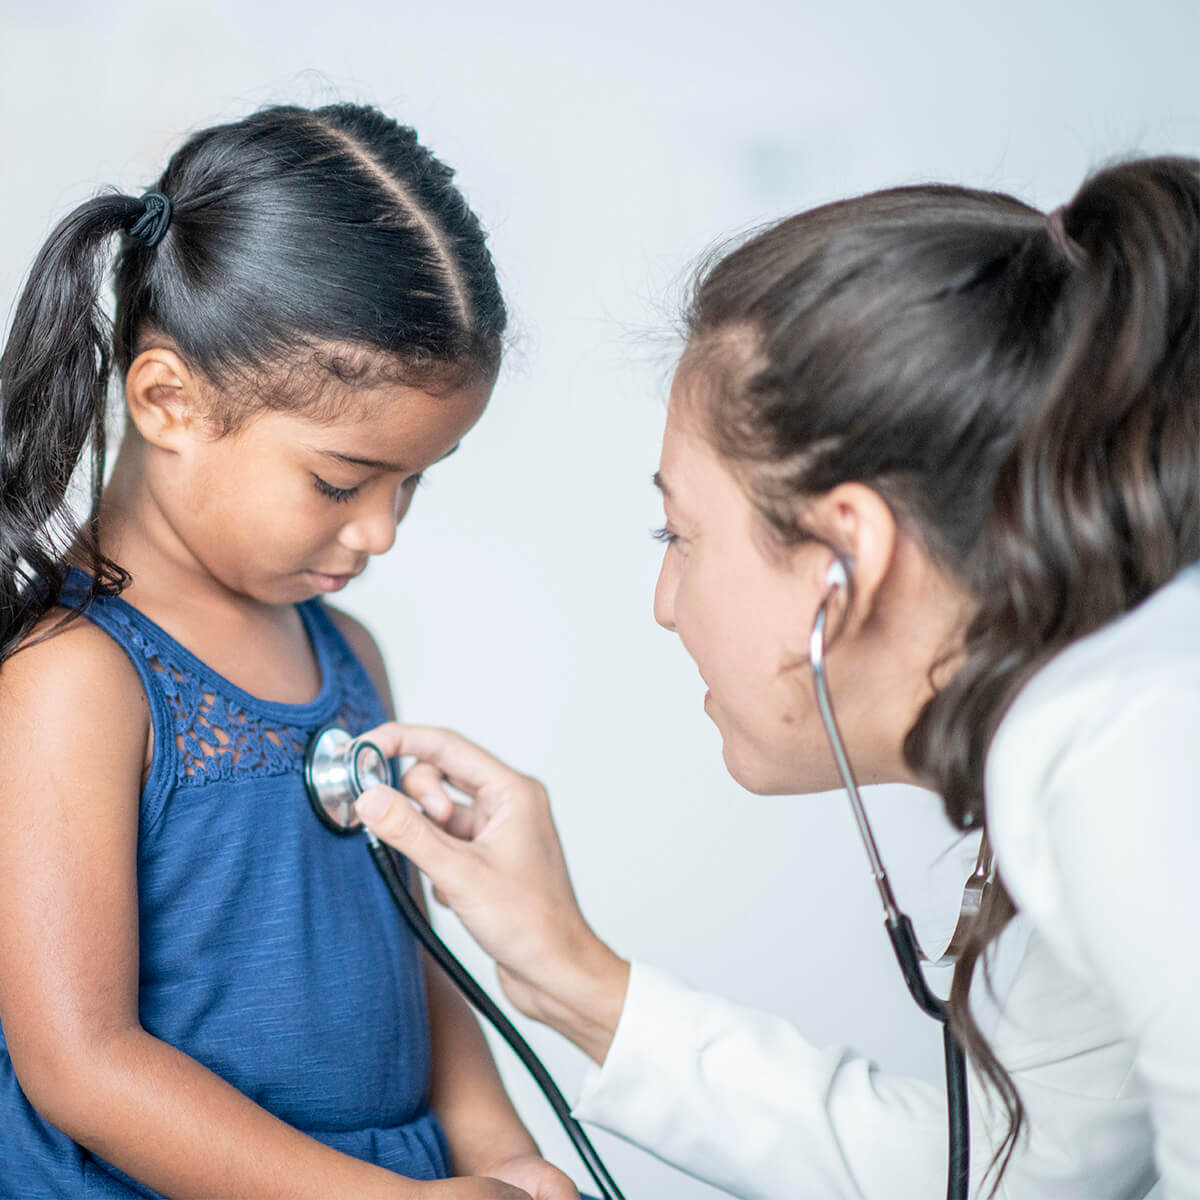 A young hispanic girl looks down at the stethoscope that her doctor is placing on her chest. Her doctor is a young caucasian woman and is wearing professional clothing.